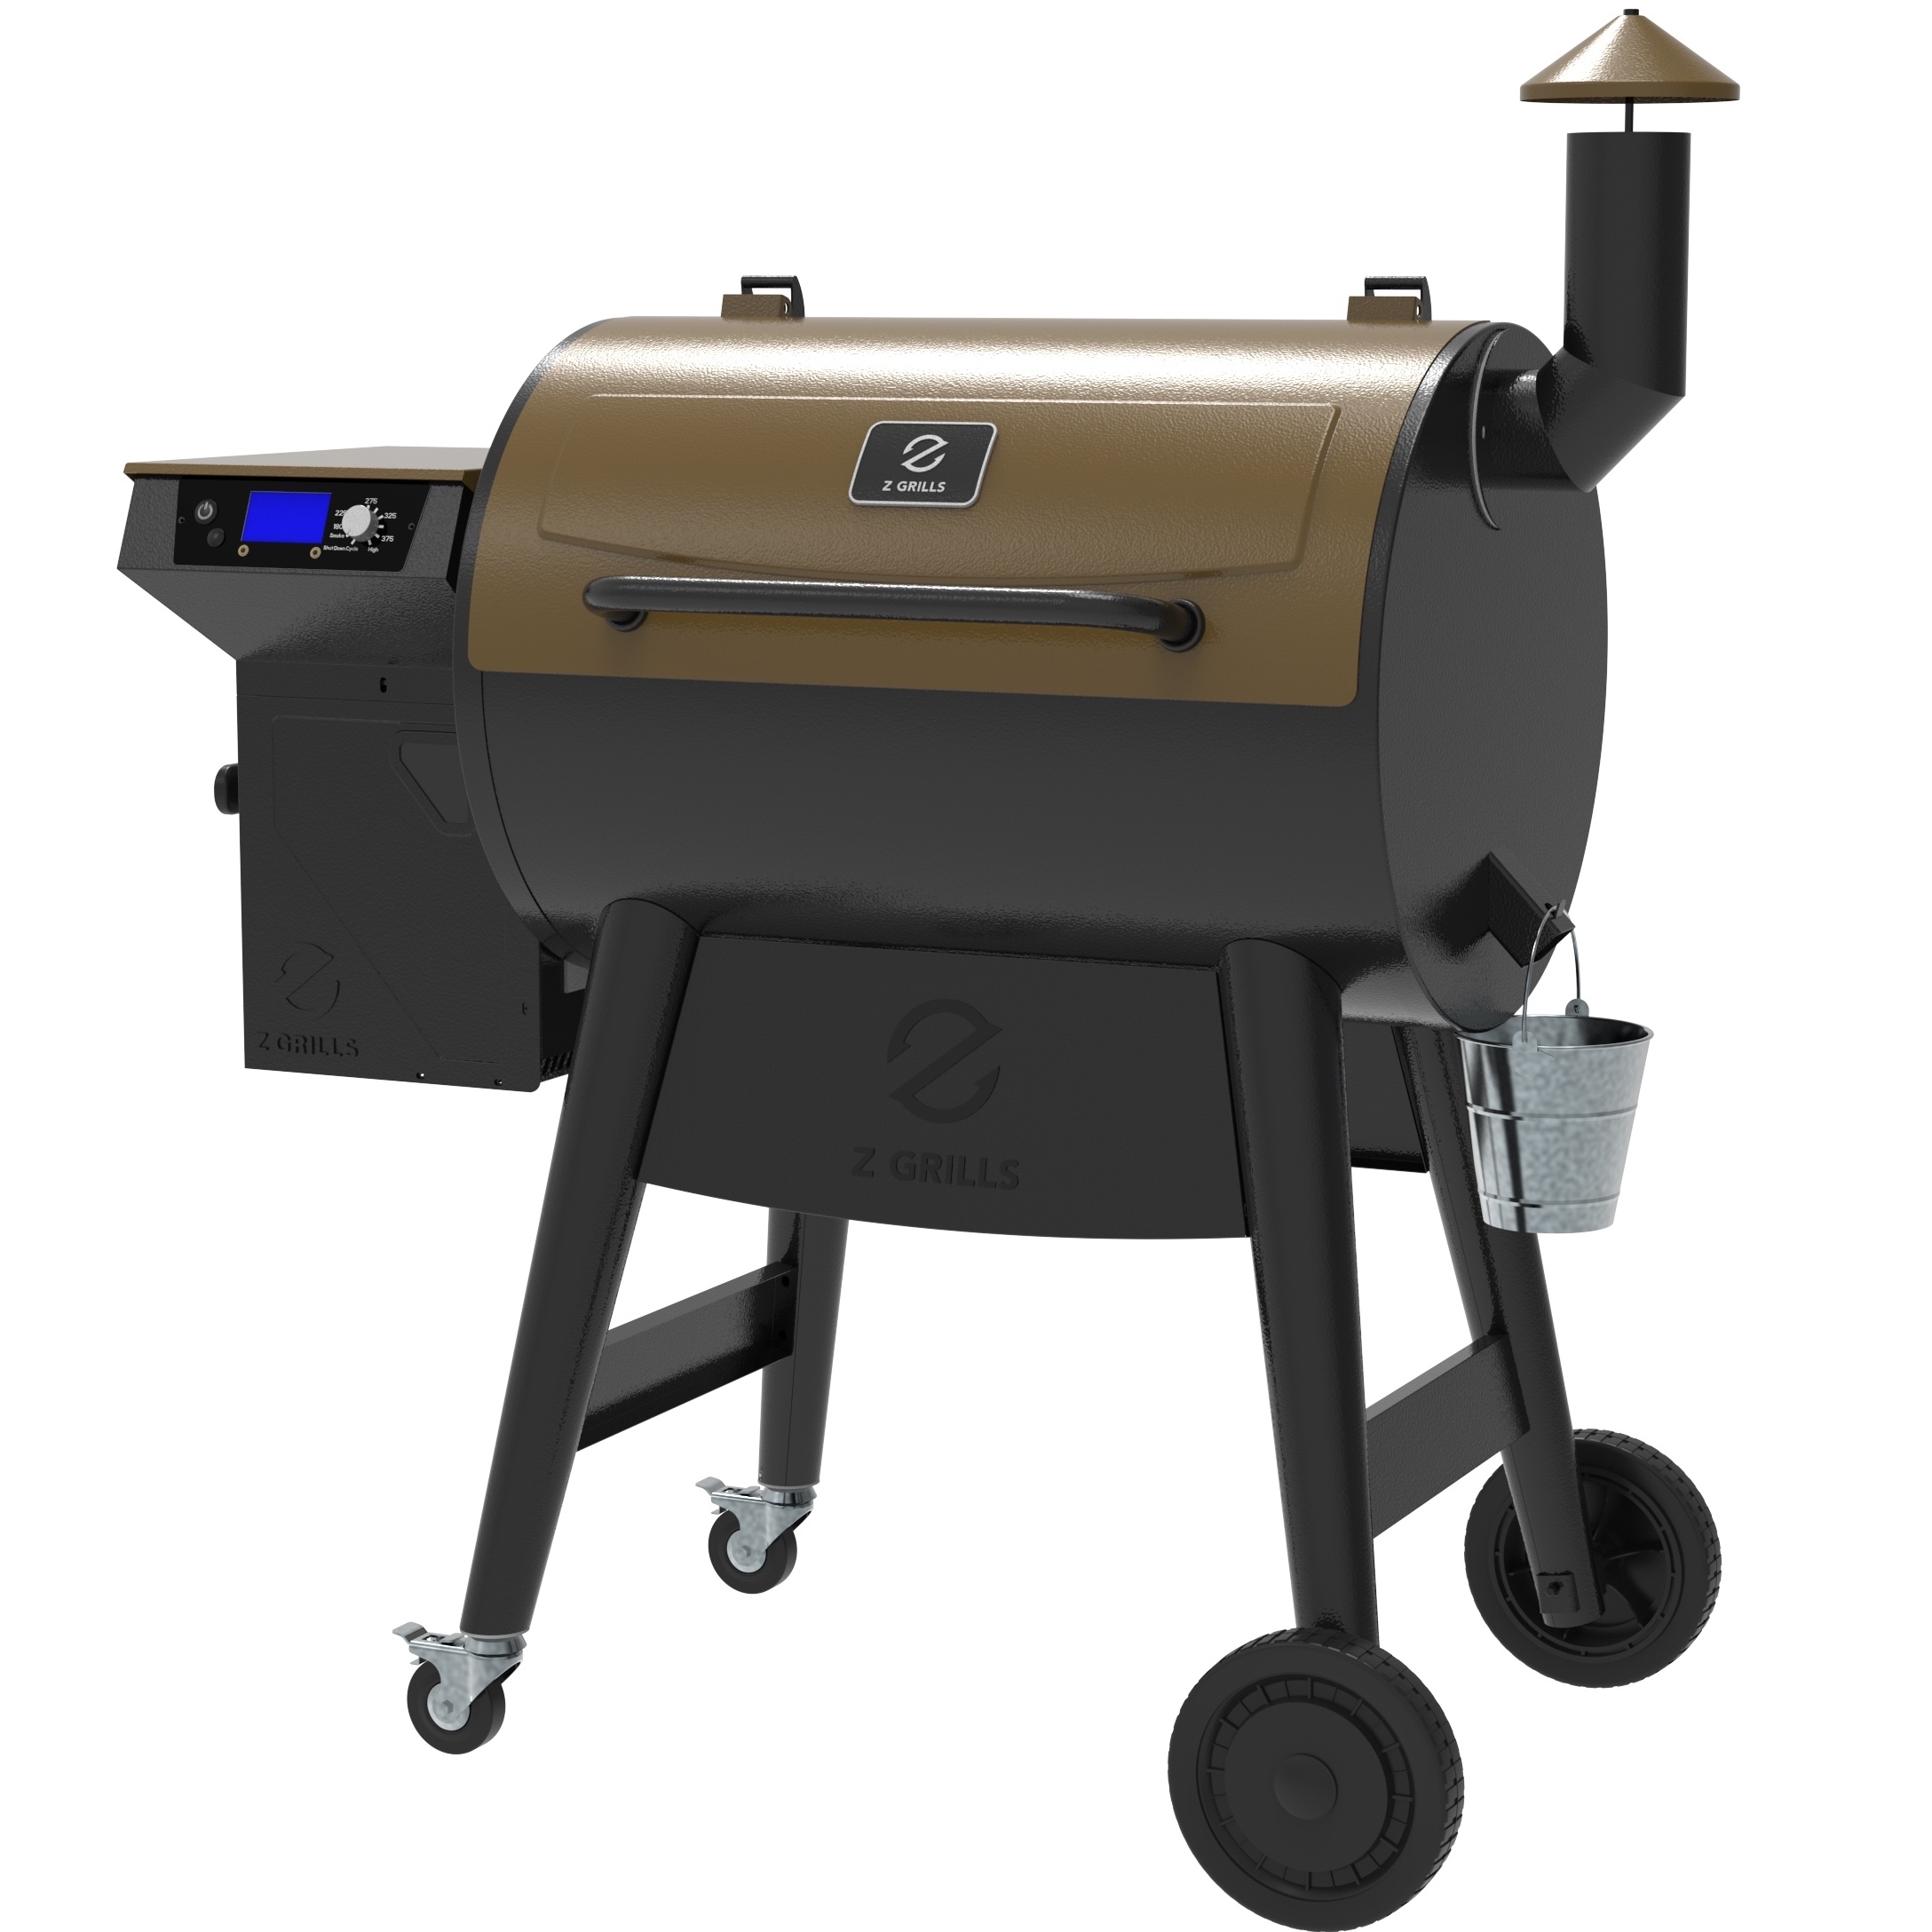 Z GRILLS ZPG-7002C3E 694 sq. in. Wood Pellet Grill and Smoker 8-in-1 BBQ Bronze - image 2 of 10